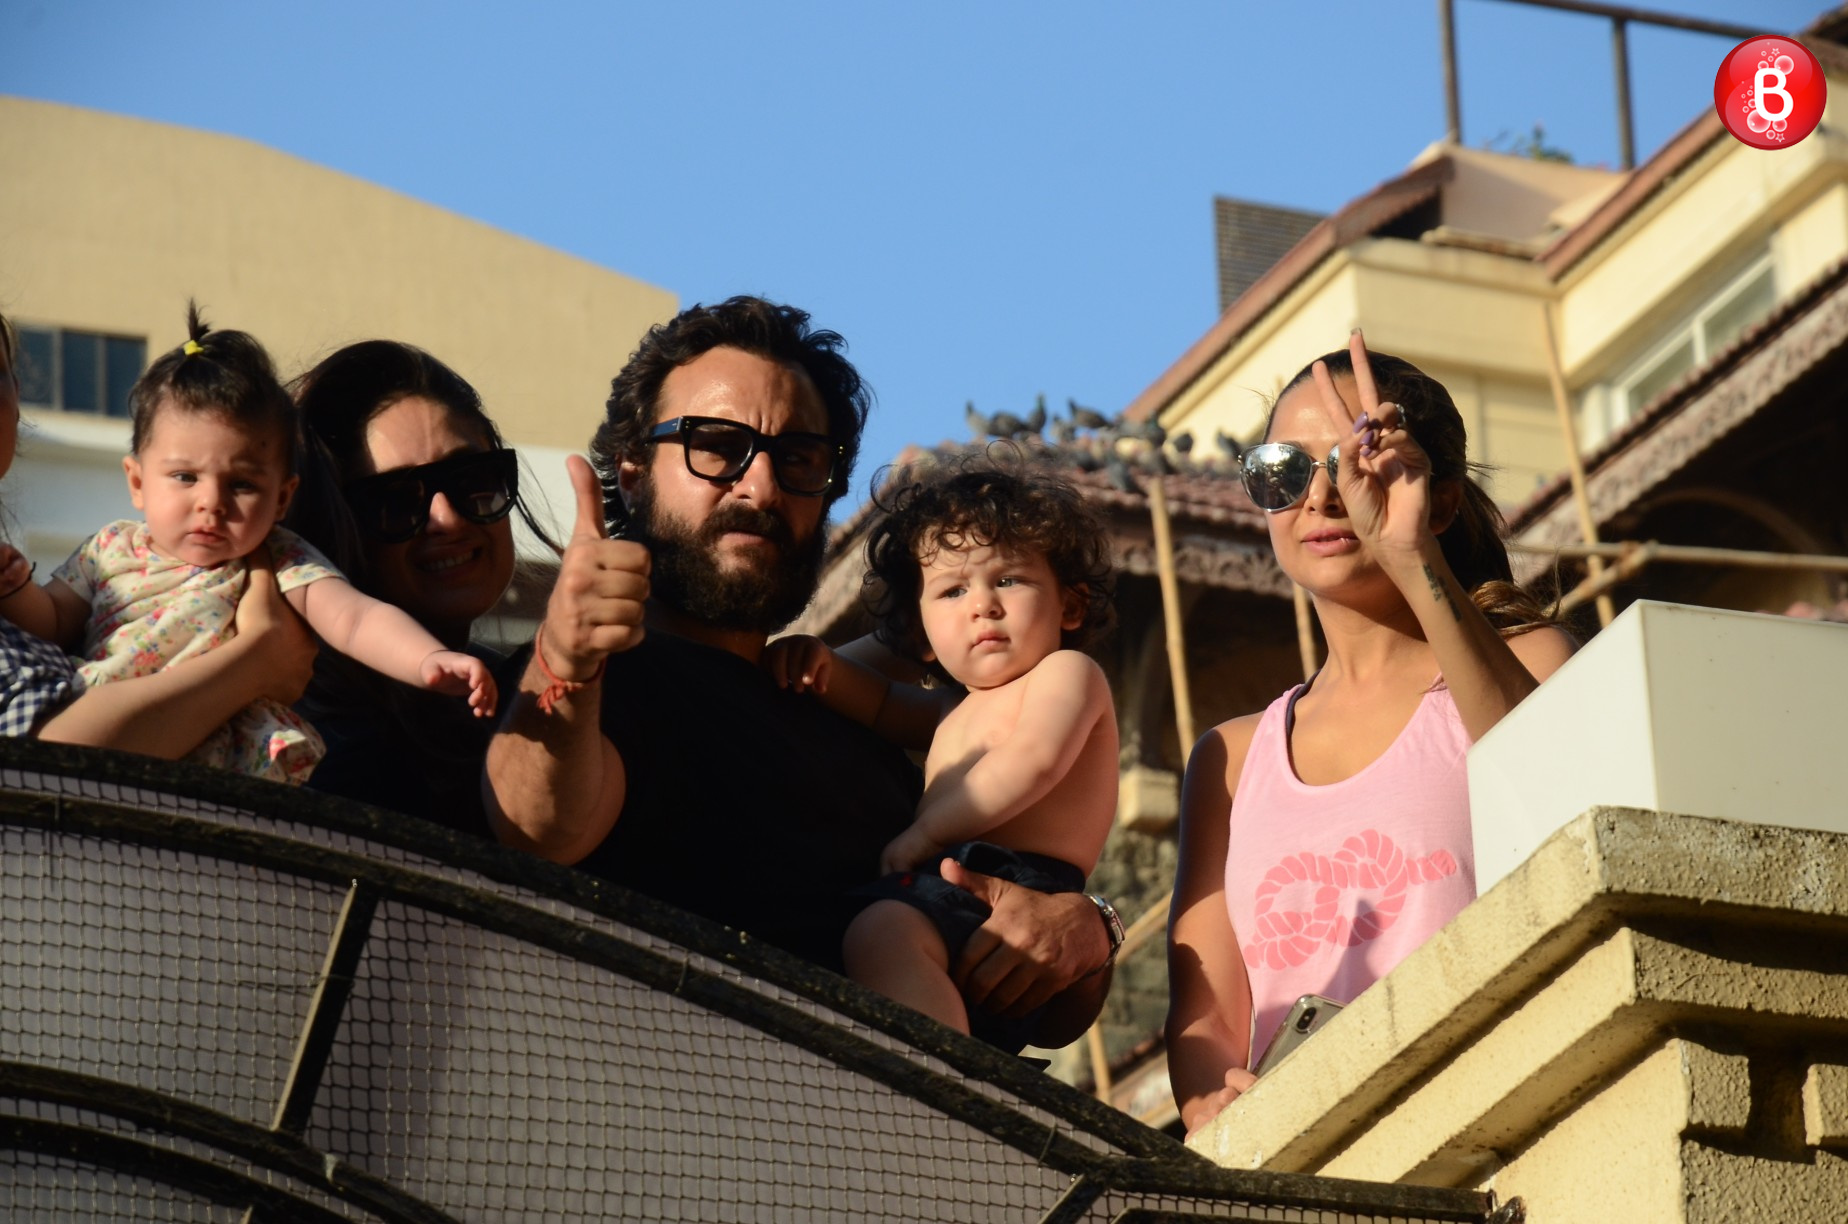 taimur and Inaaya’s pictures along with their parents